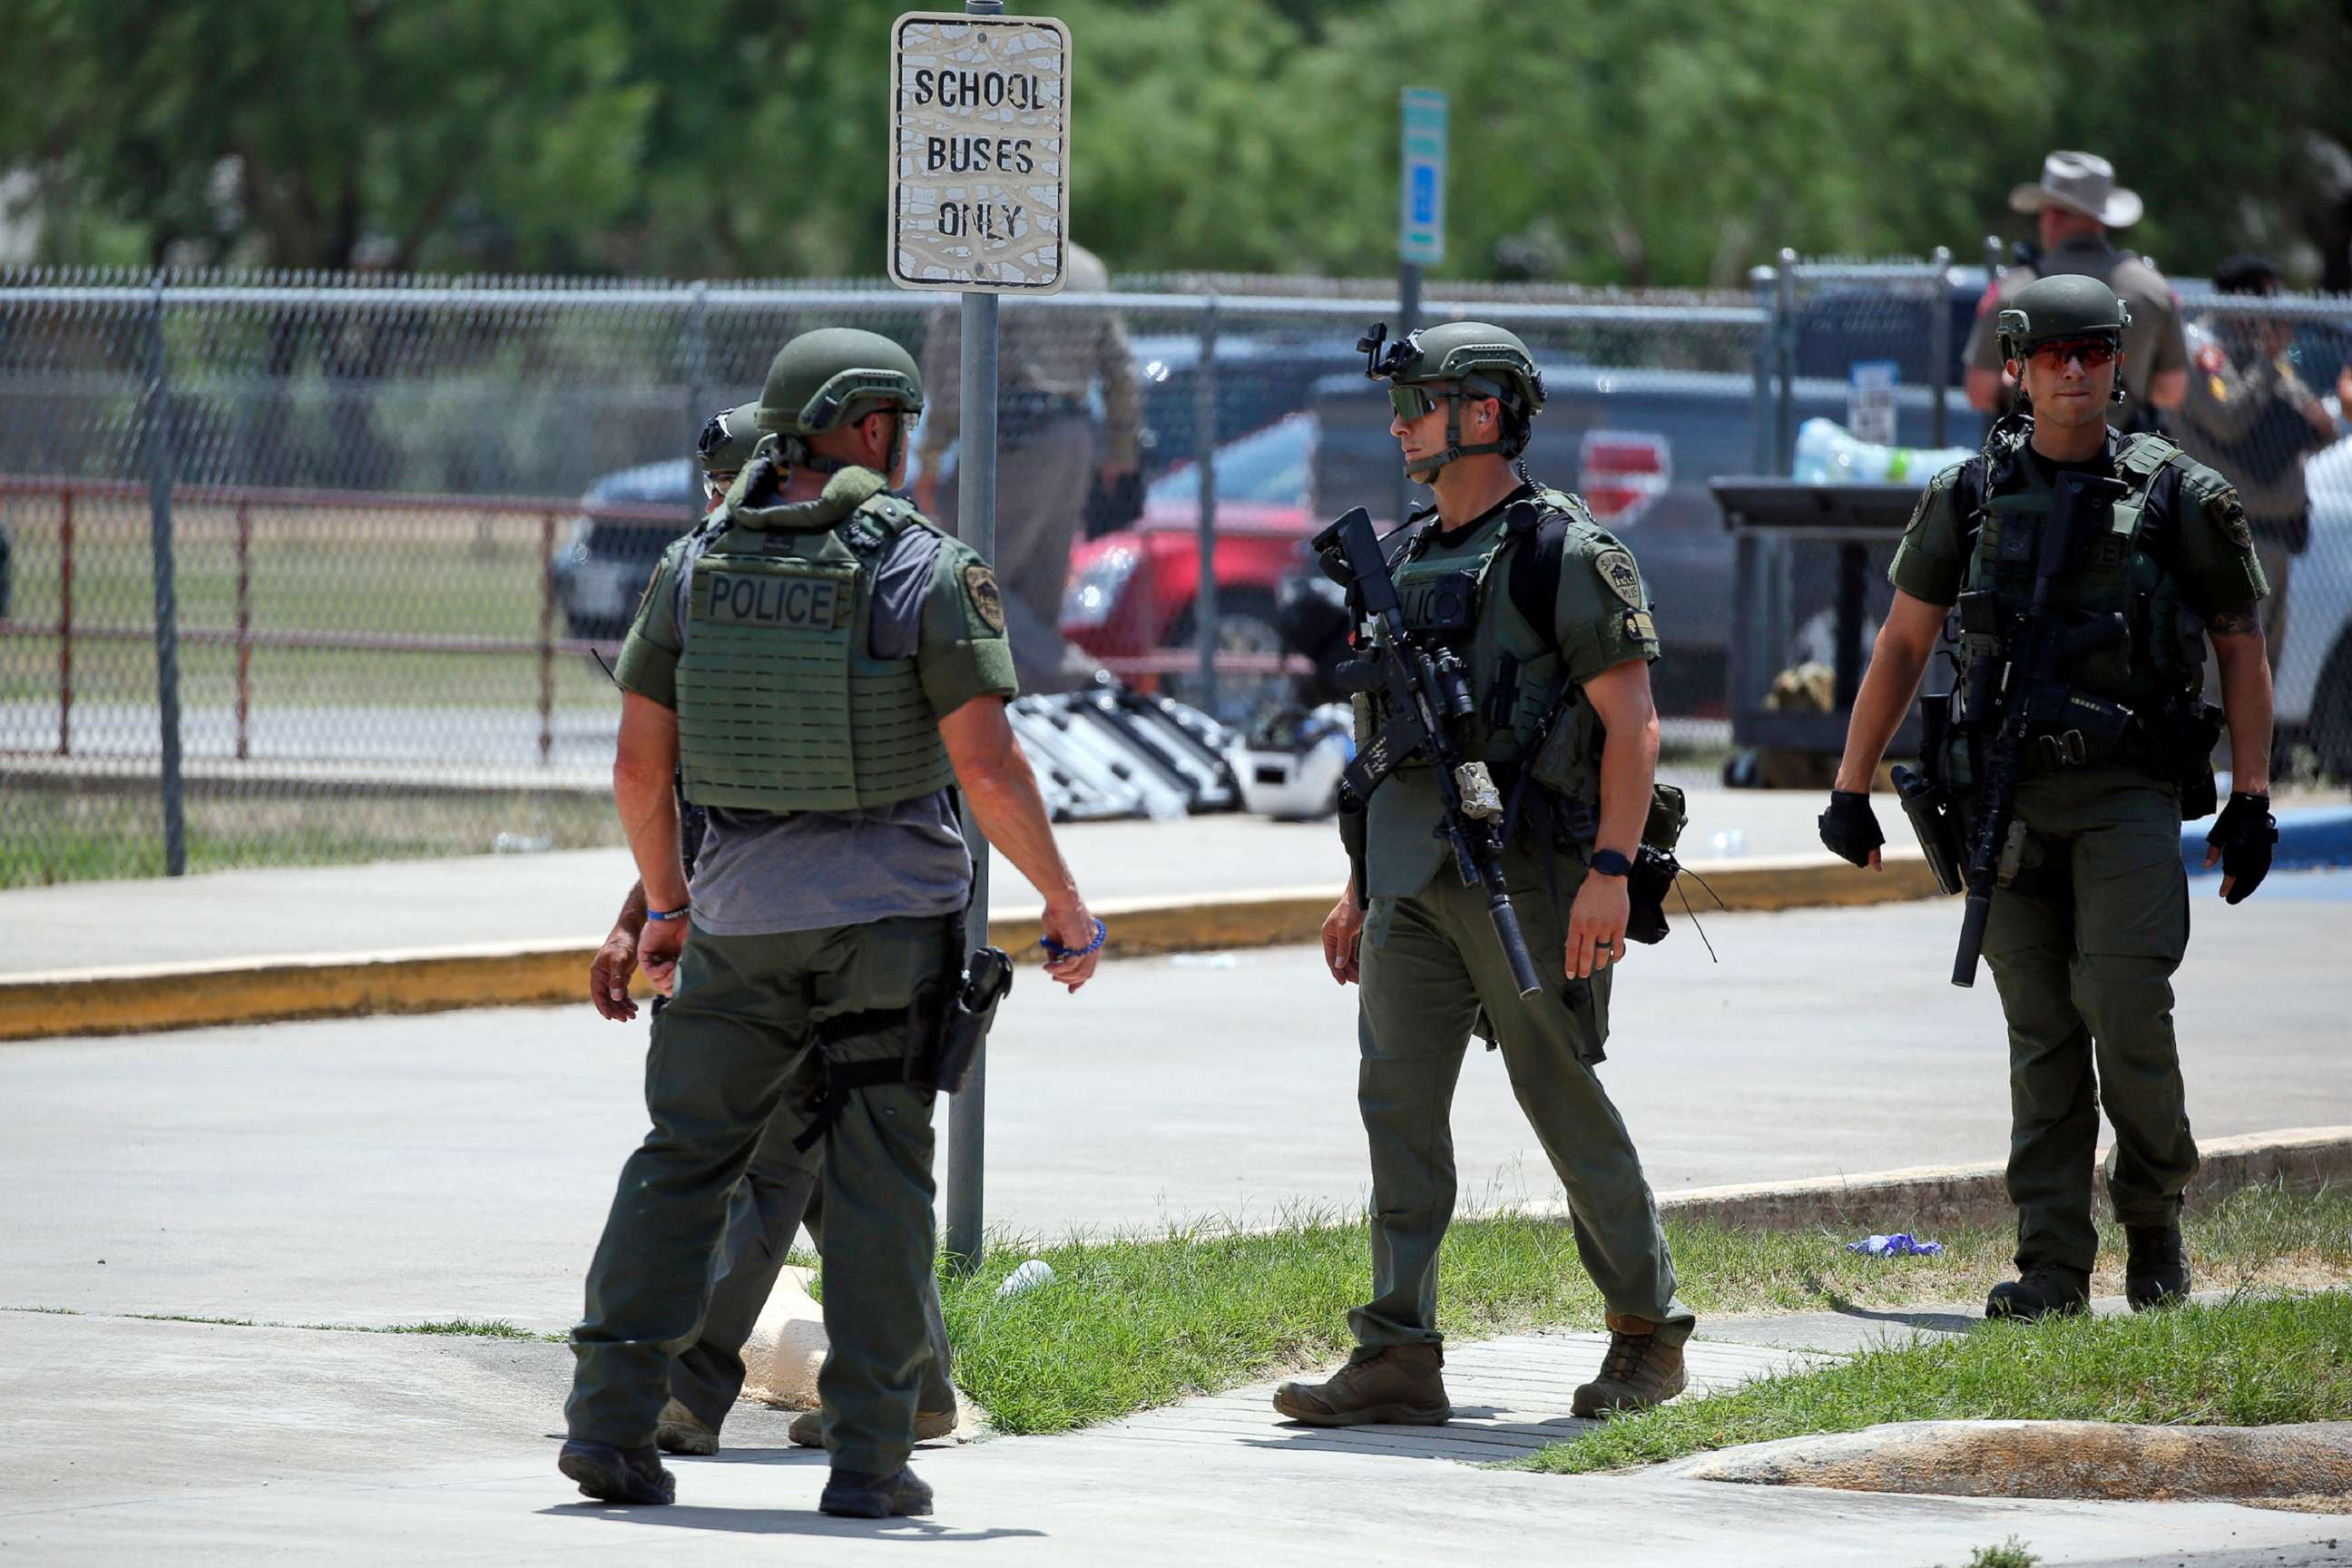 PHOTO: Law enforcement personnel stand outside Robb Elementary School following a shooting, on May 24, 2022, in Uvalde, Texas.